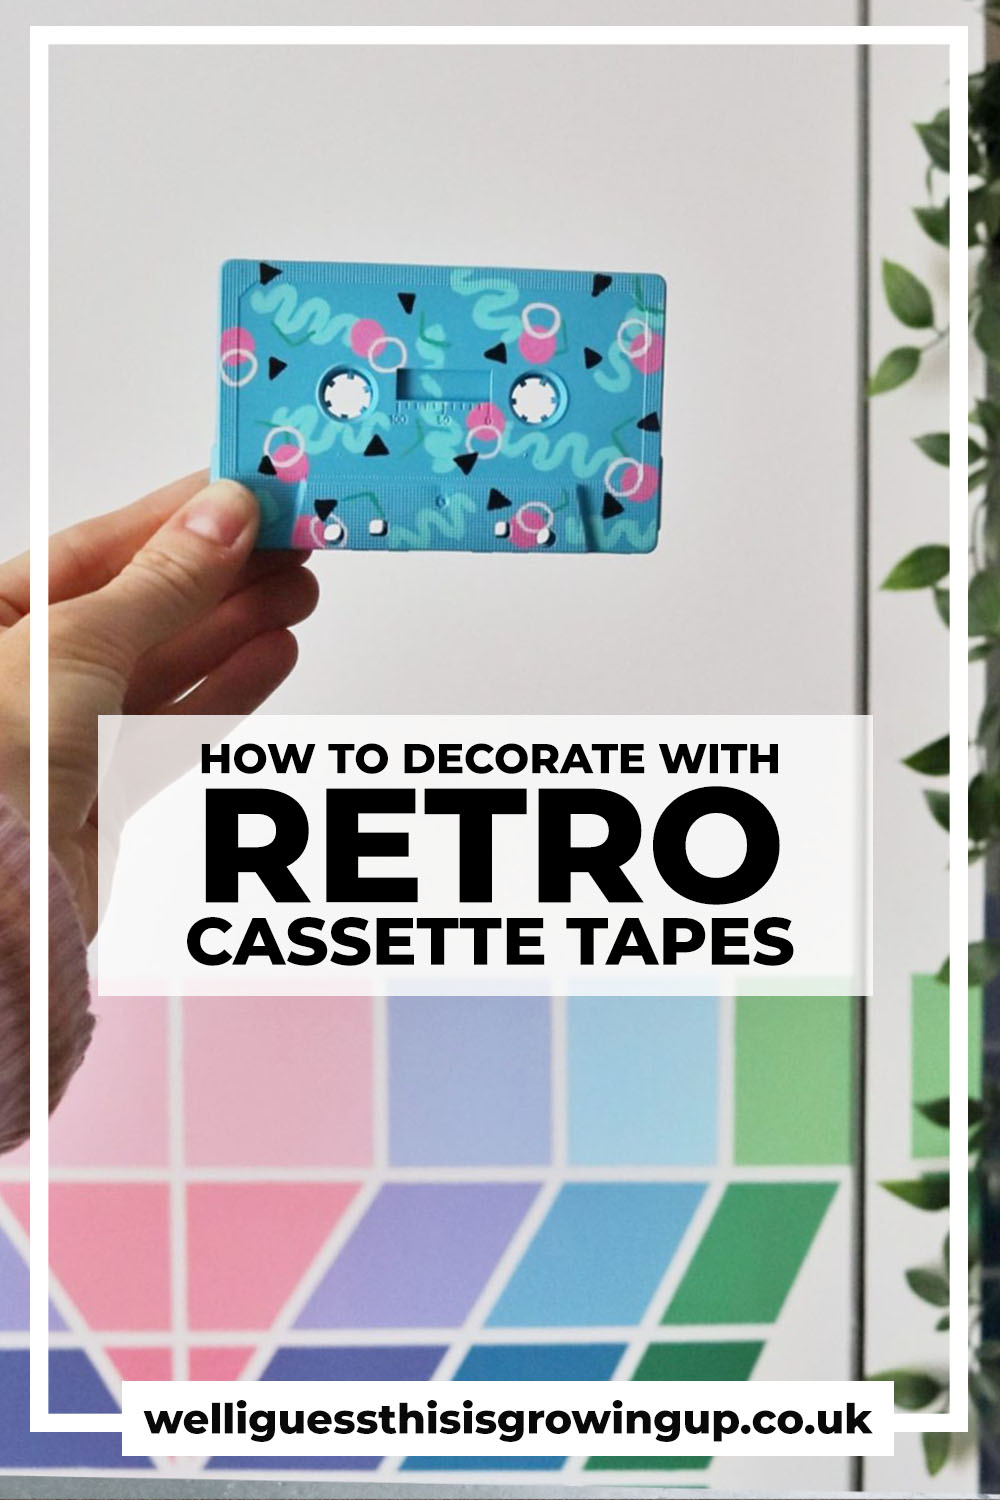  HOW TO DECORATE WITH RETRO CASSETTES TAPES